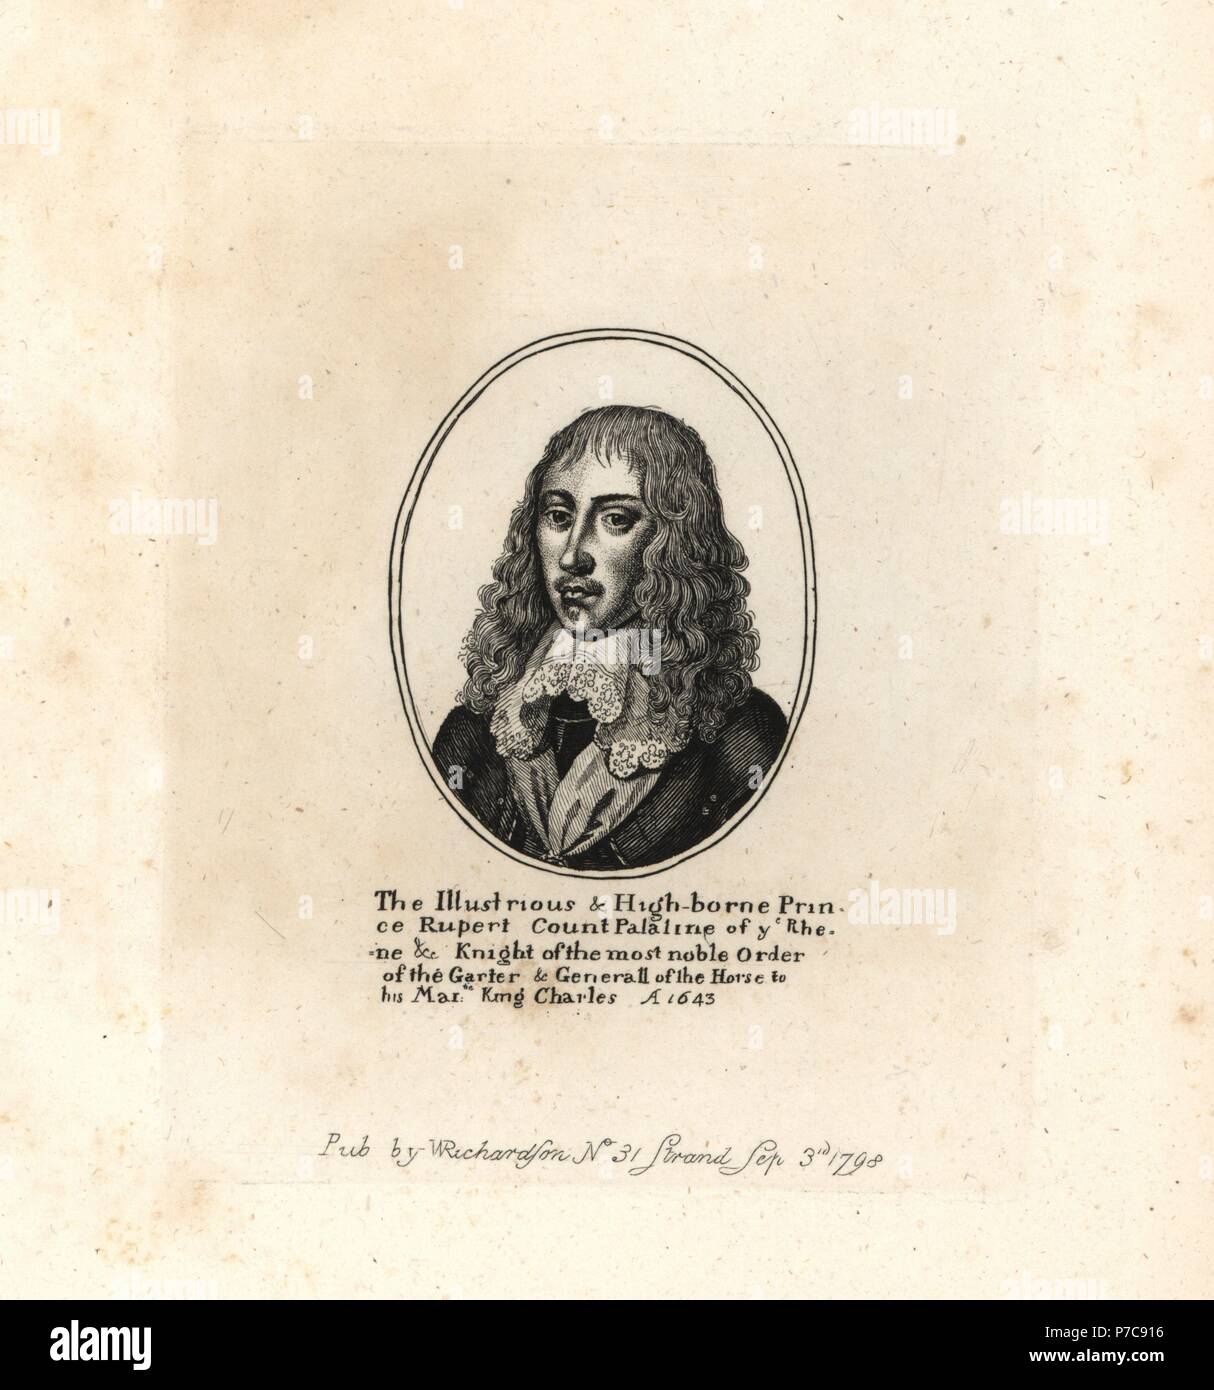 Prince Rupert, Count Palatine of the Rhine, General of the Horse to King Charles I, 1643. Copperplate engraving from William Richardson's Portraits Illustrating Granger's Biographical History of England, London, 1792–1812. James Granger (1723–1776) was an English clergyman, biographer, and print collector. Stock Photo